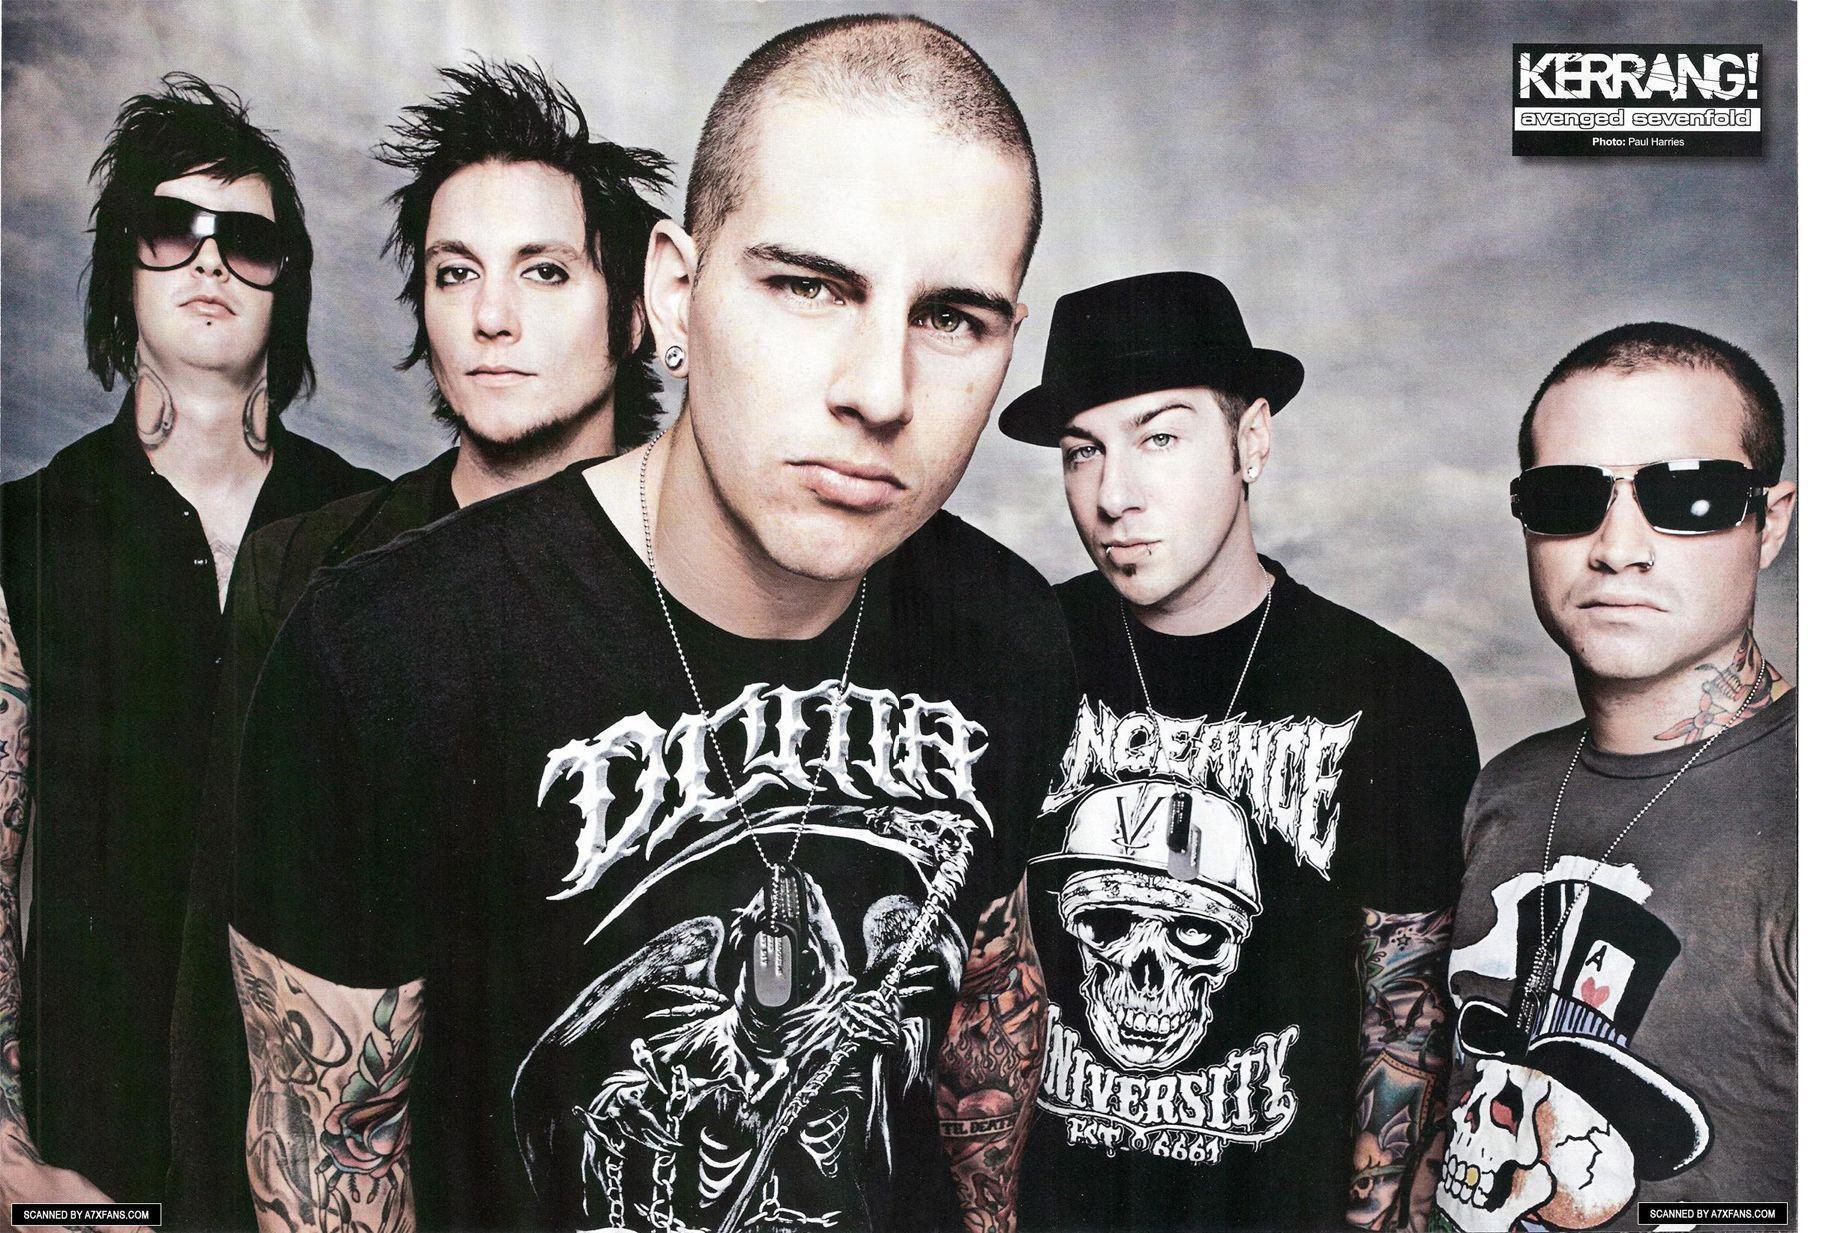 12 Quality Avenged Sevenfold Wallpapers, Music